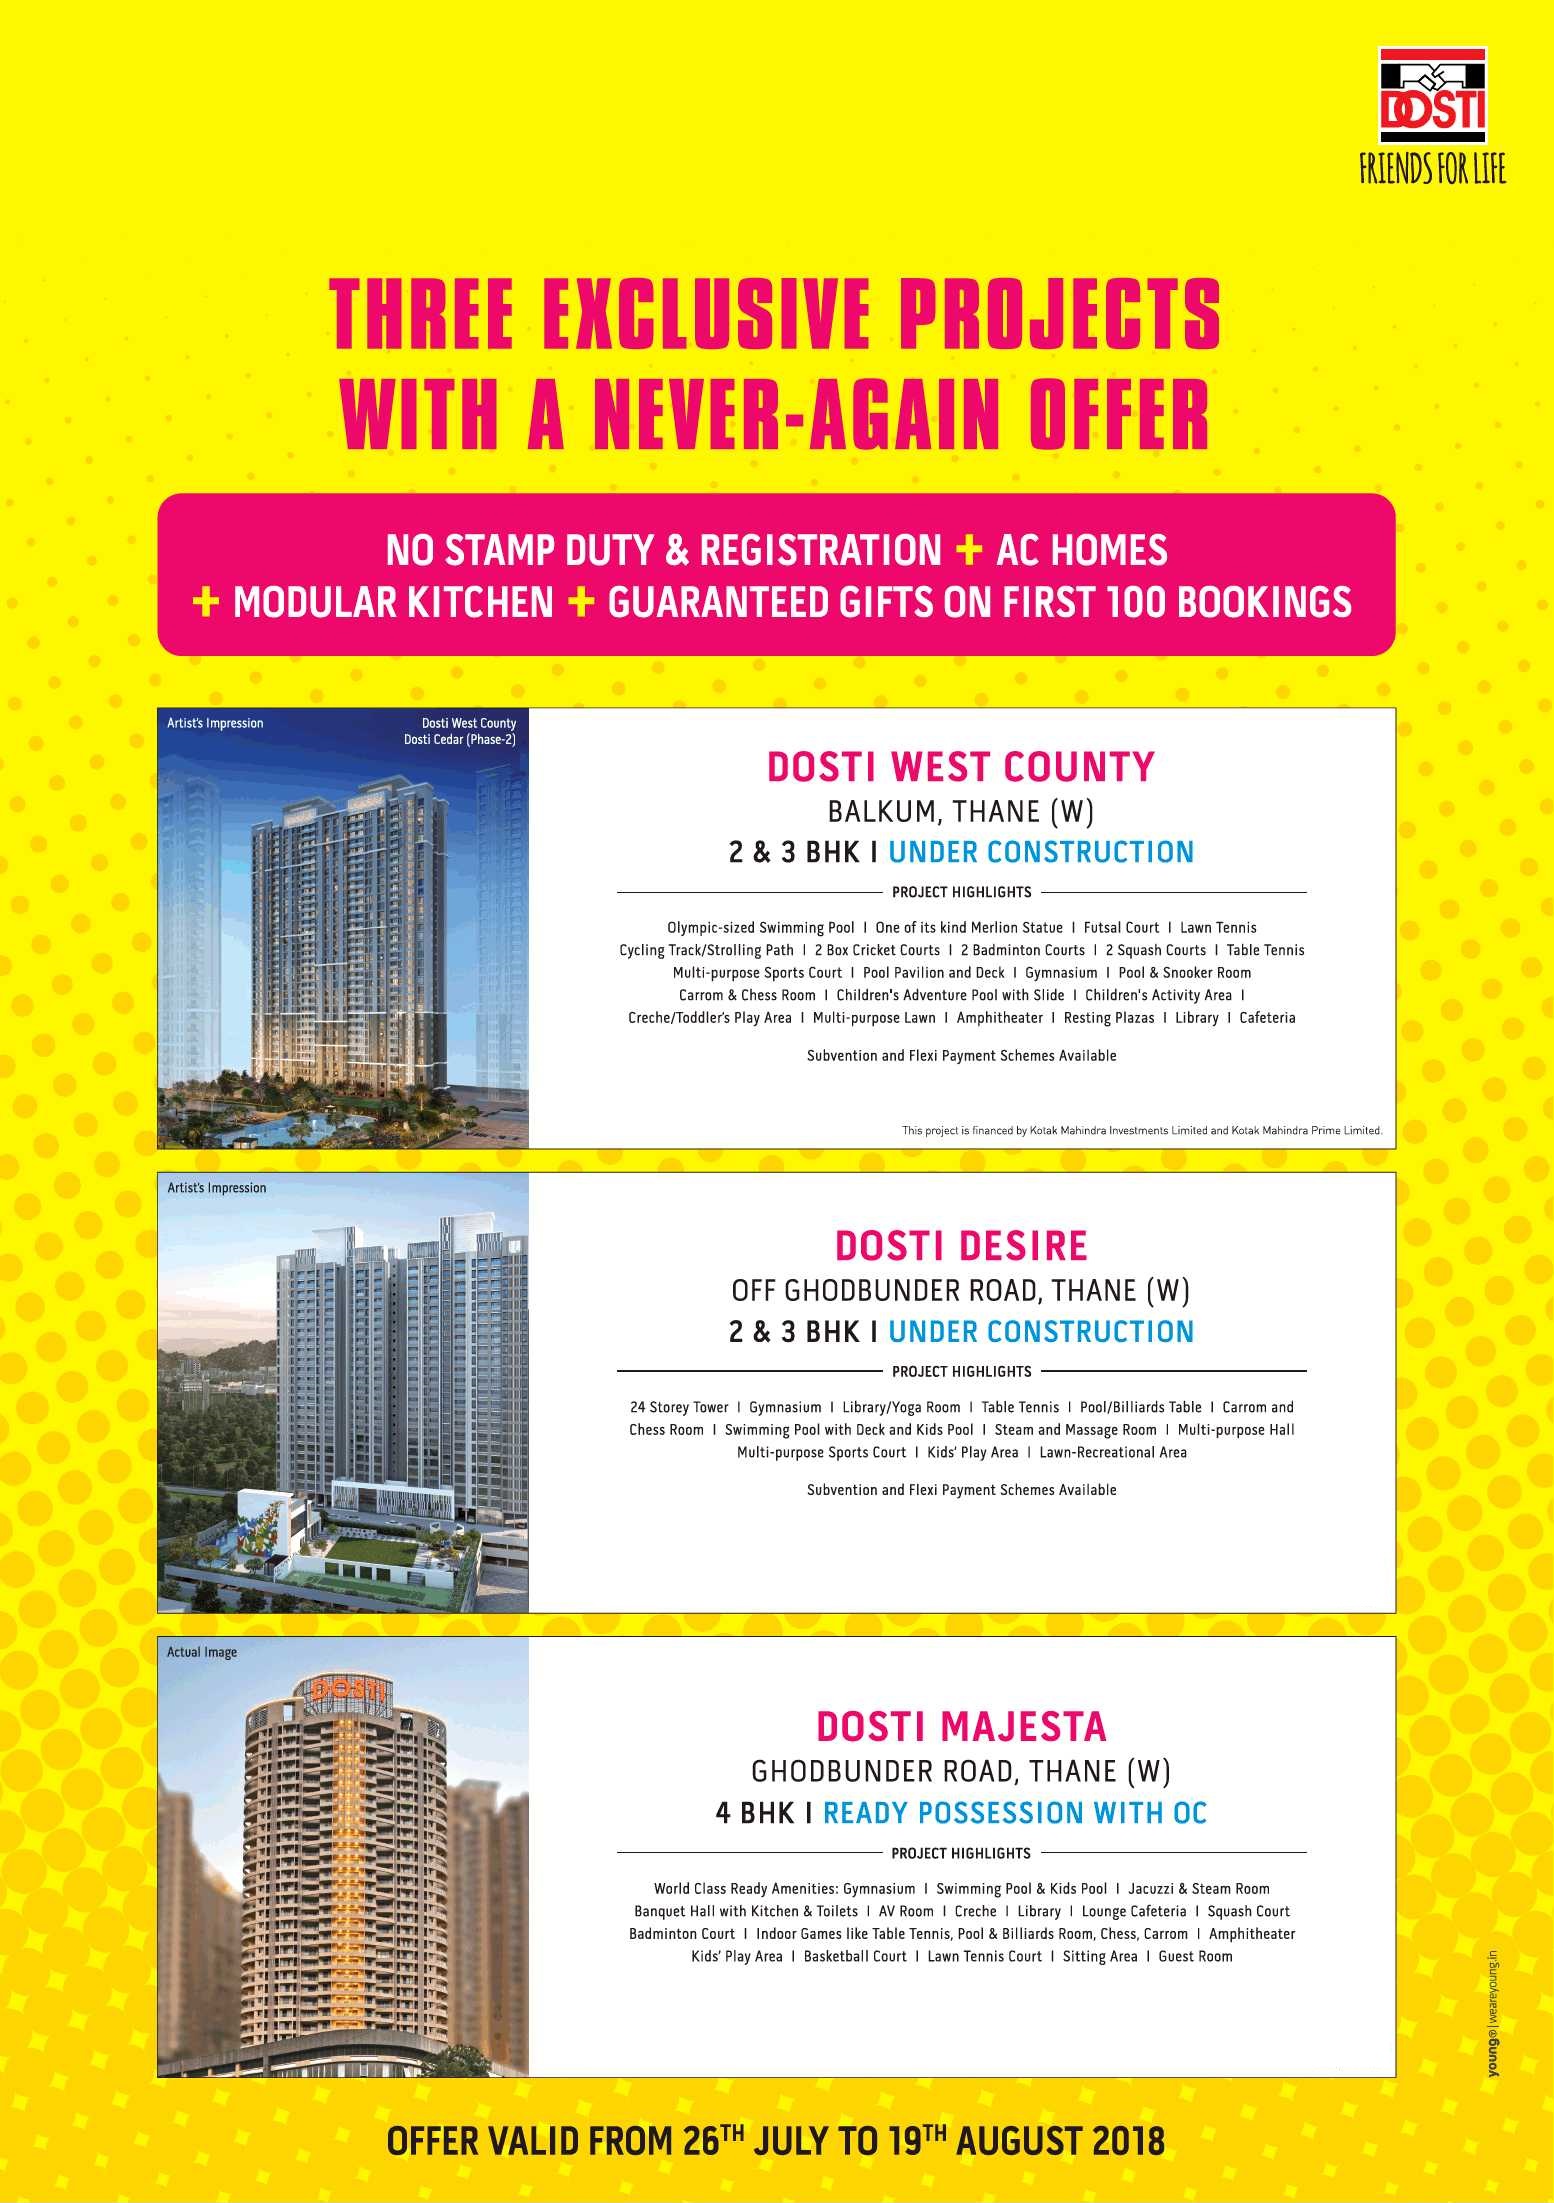 Dosti Reality introducing three exclusive projects with a never again offer in Mumbai